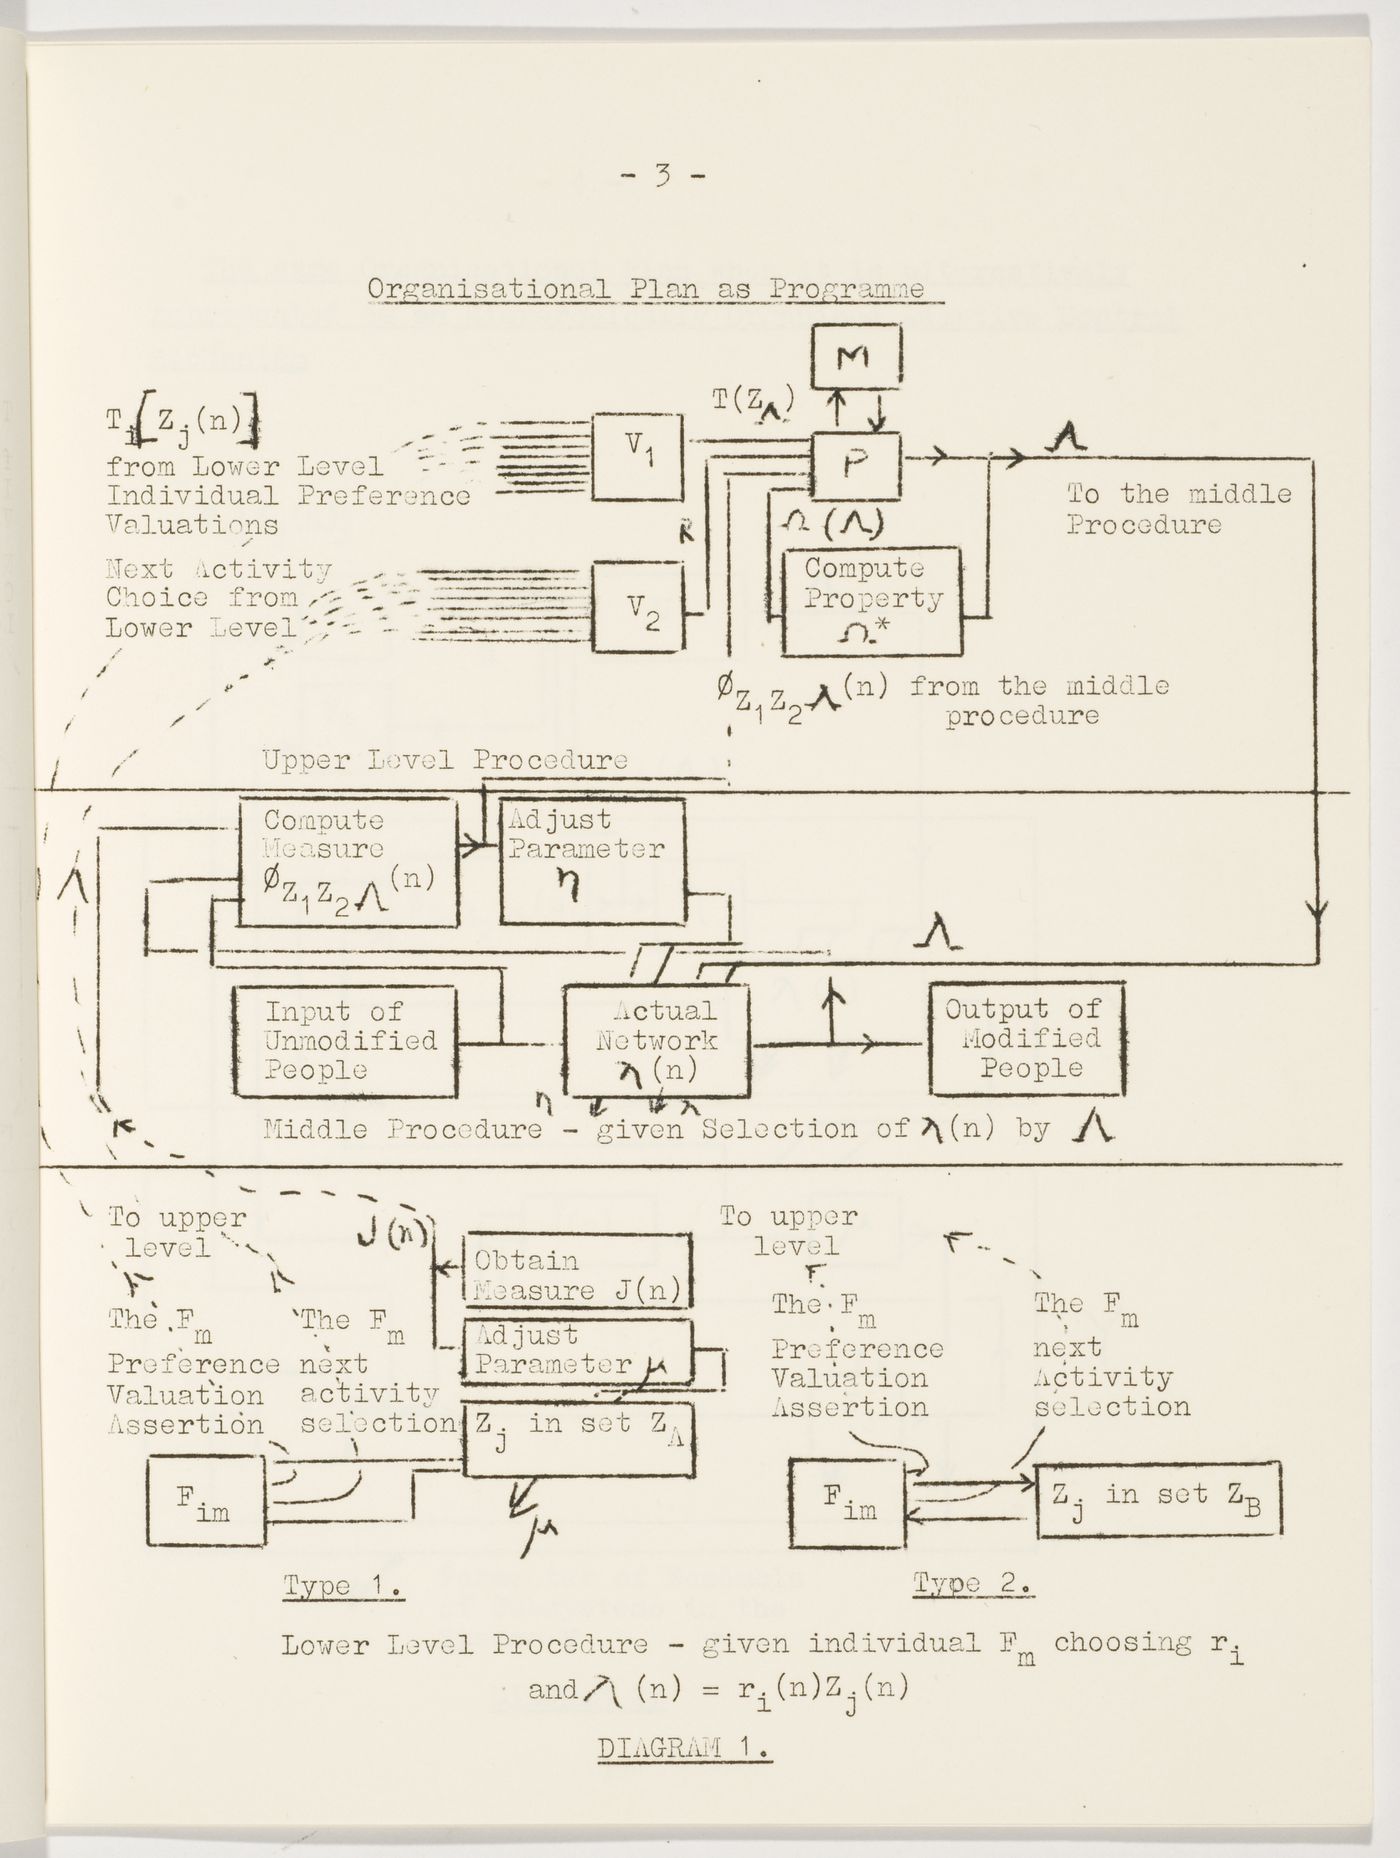 "Organisational Plan as Programme", from the minutes of the Fun Palace cybernetics committee meeting, 27th January 1965
